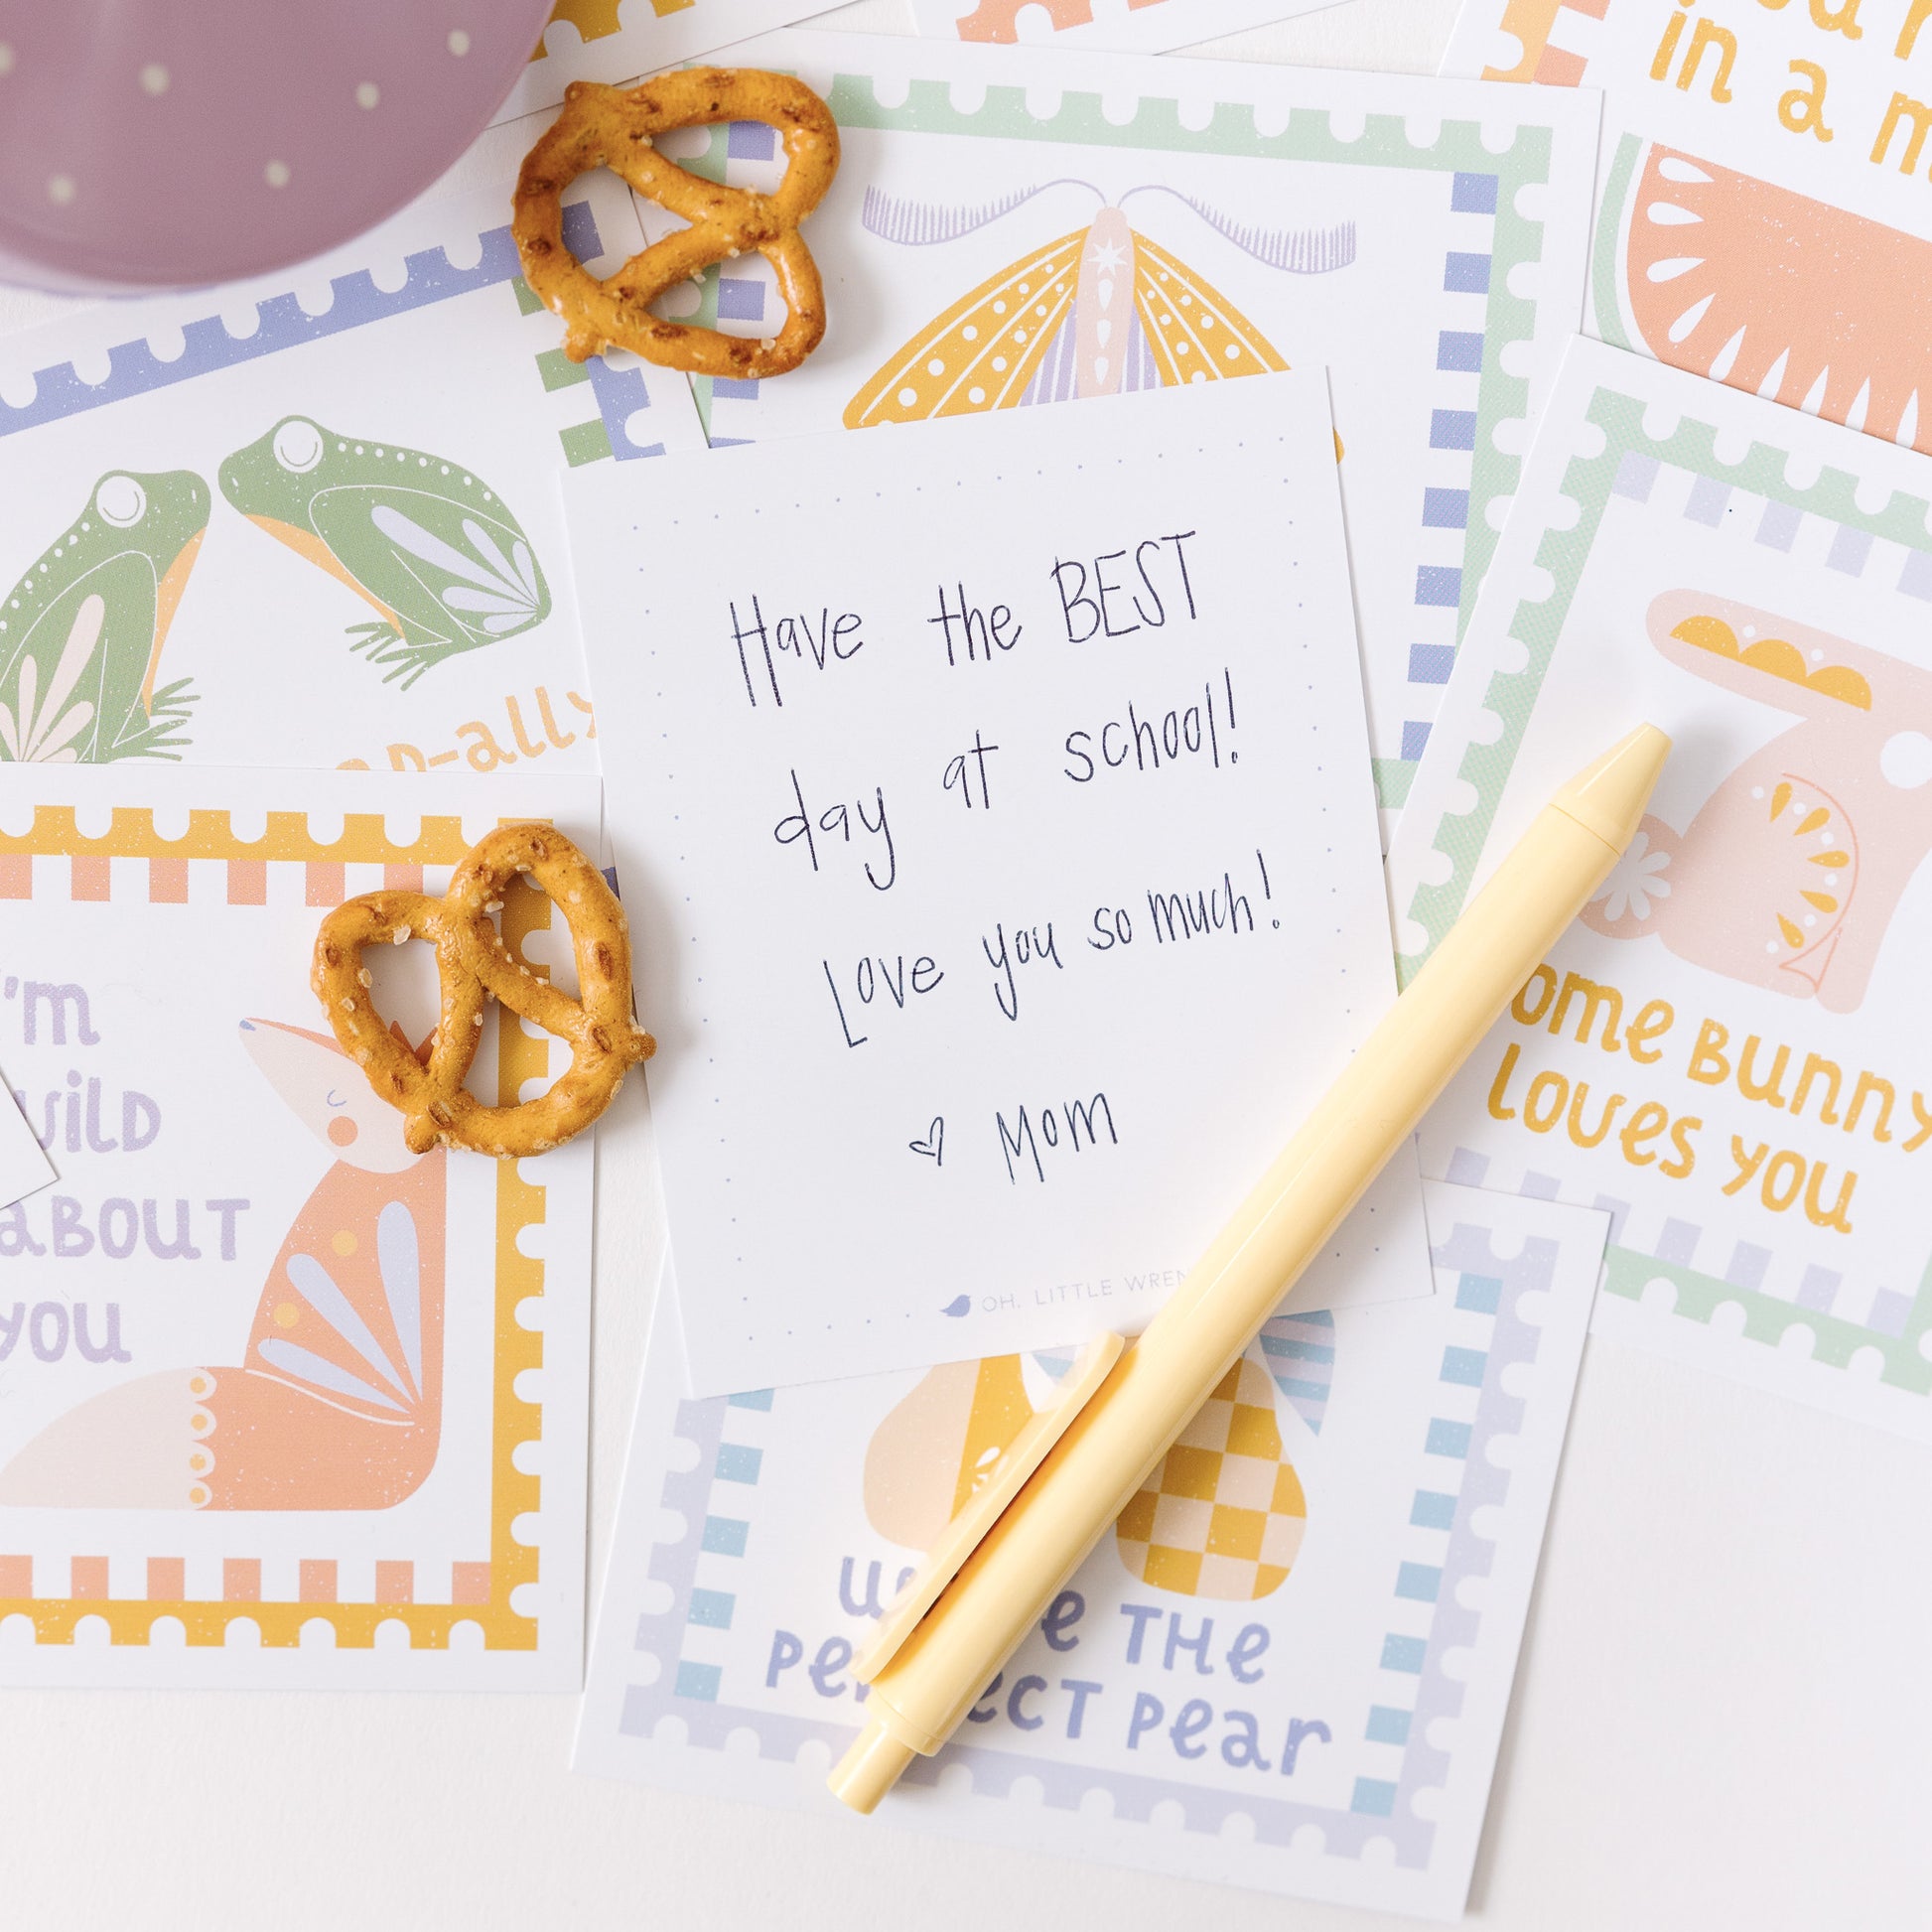 the back of the notecard is shown that includes the handwritten note 'have the BEST day at school! Love you so much! heart mom". more cards are in the background, as well as a yellow ballpoint pen and pretzels.